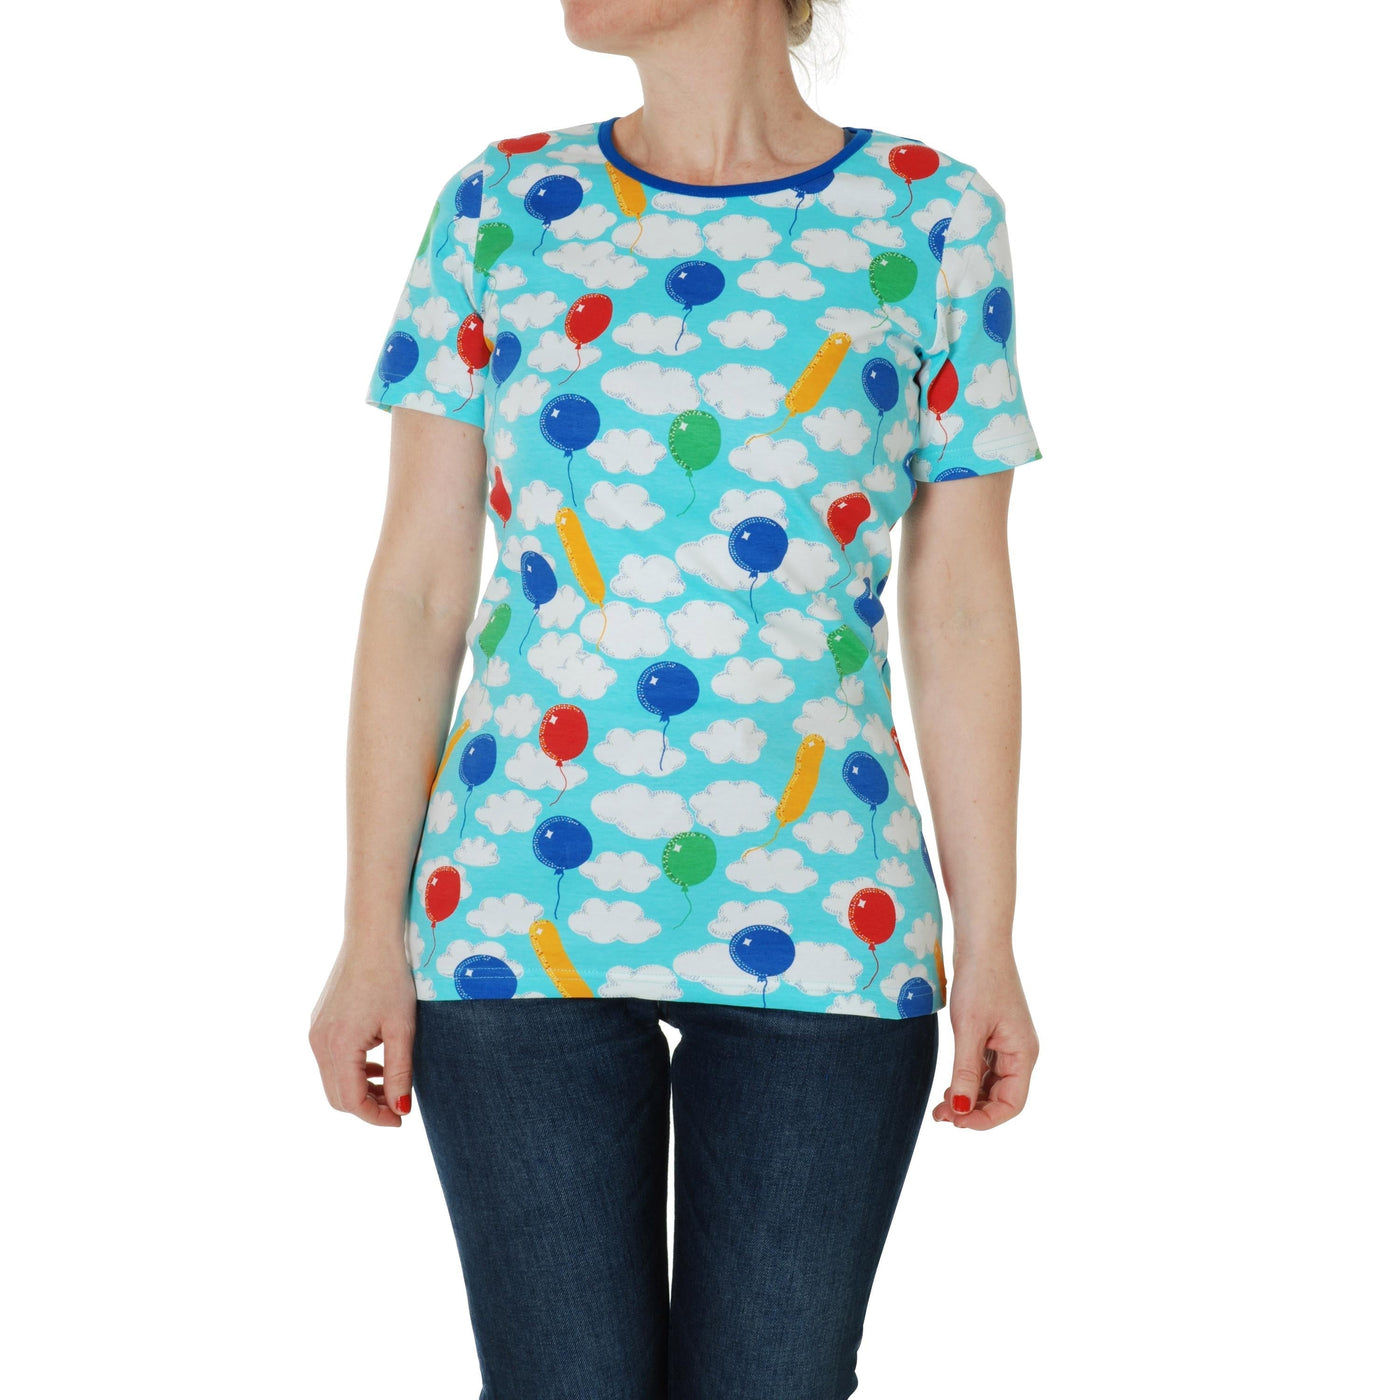 DUNS Adult Short Sleeve Top - A Cloudy Day (Small)